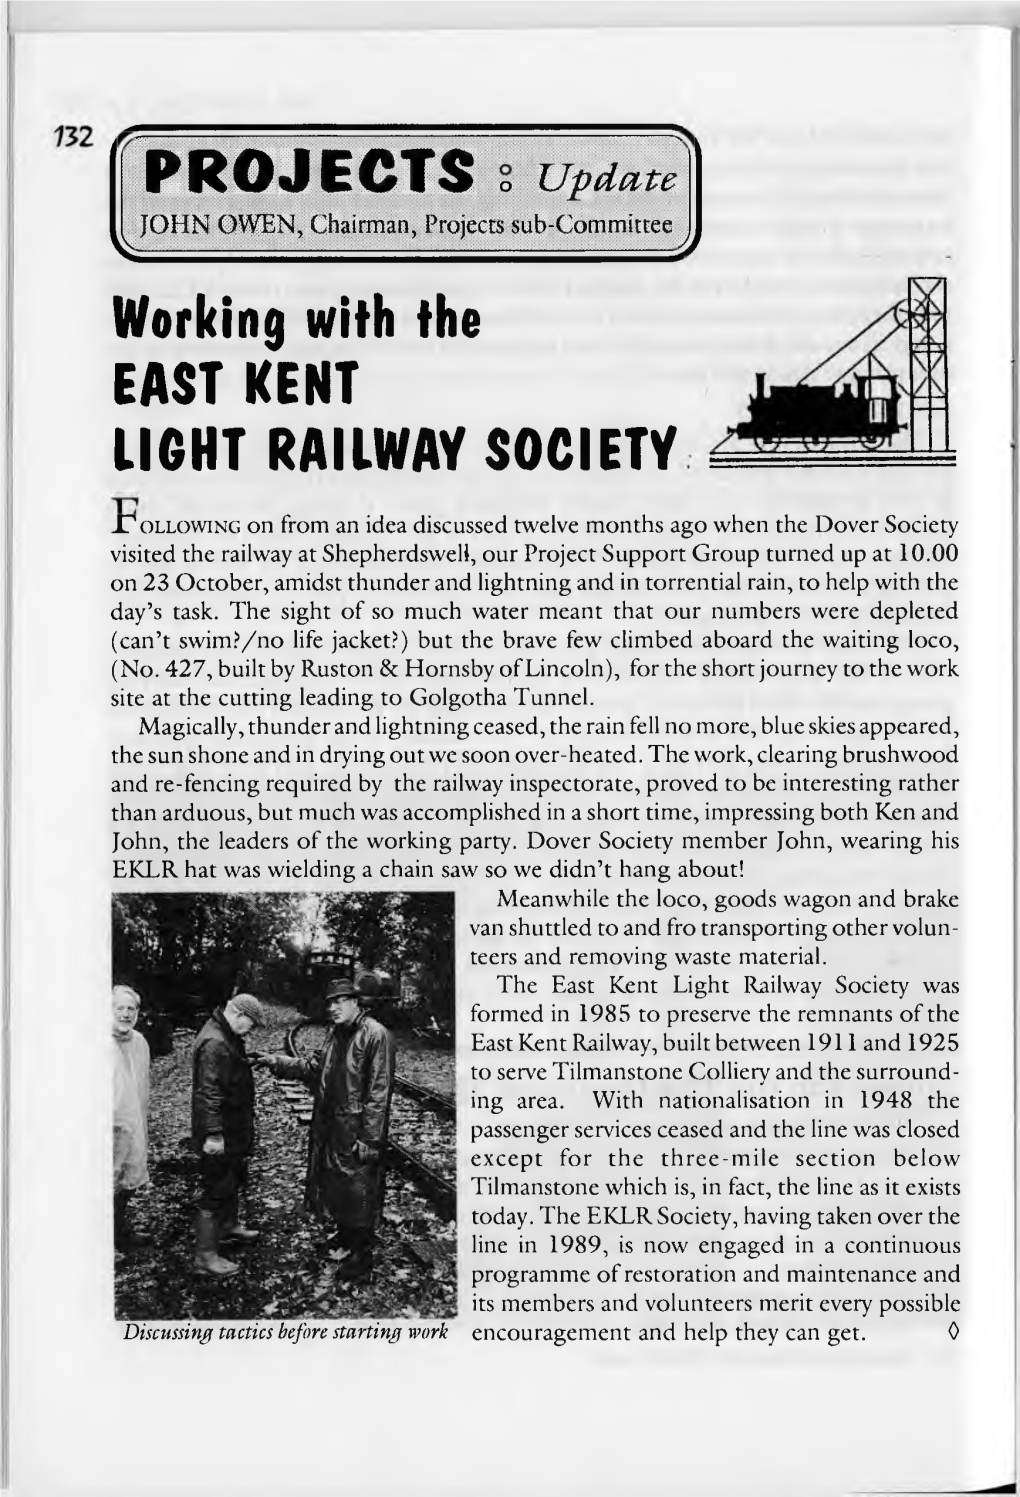 Working with the EAST KENT LIGHT RAILWAY SOCIETY